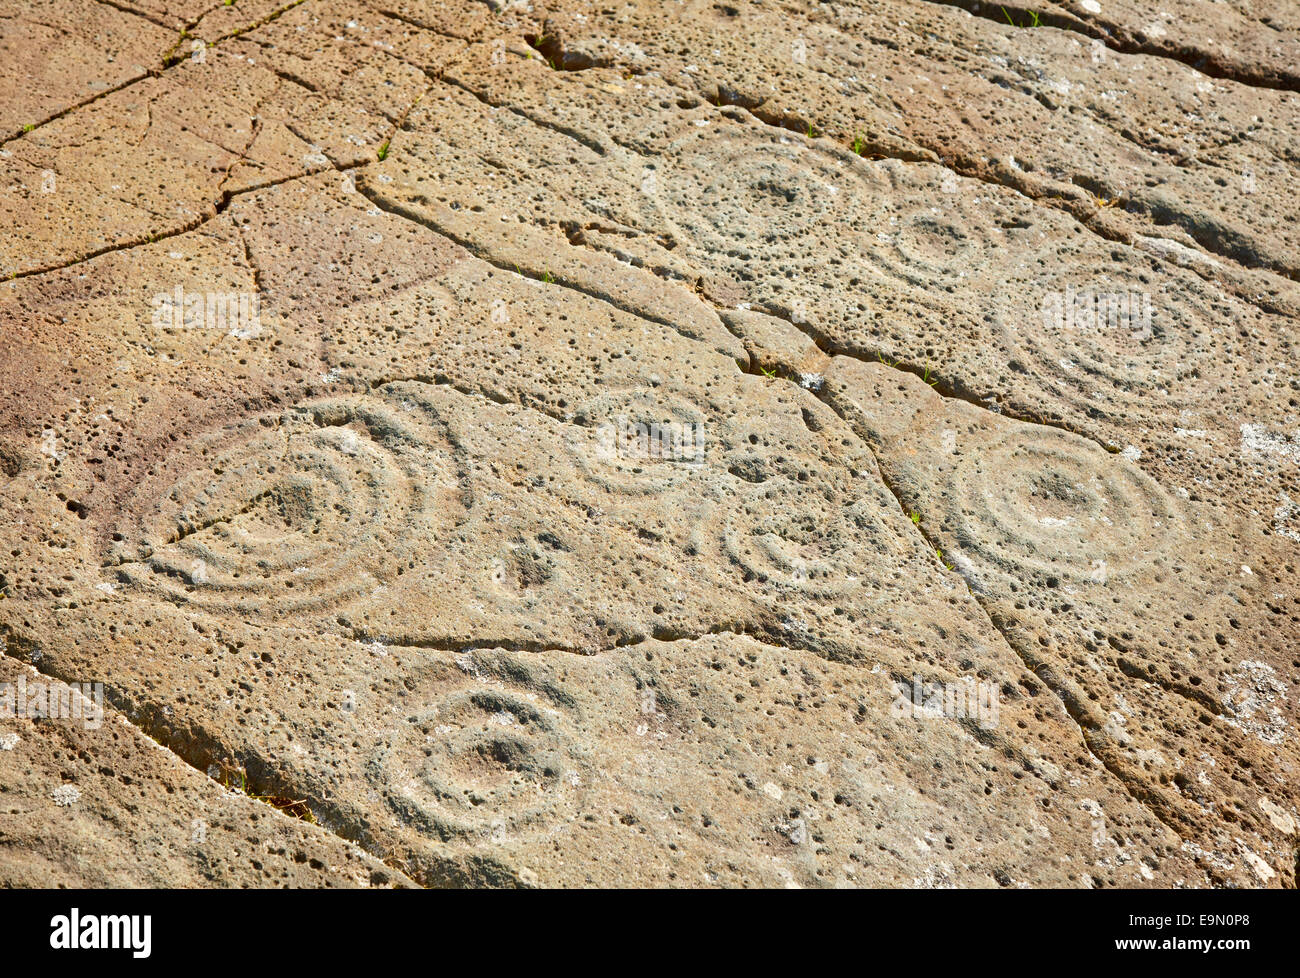 Cup and ring marks on a stone near Cairnbaan in Scotland Stock Photo